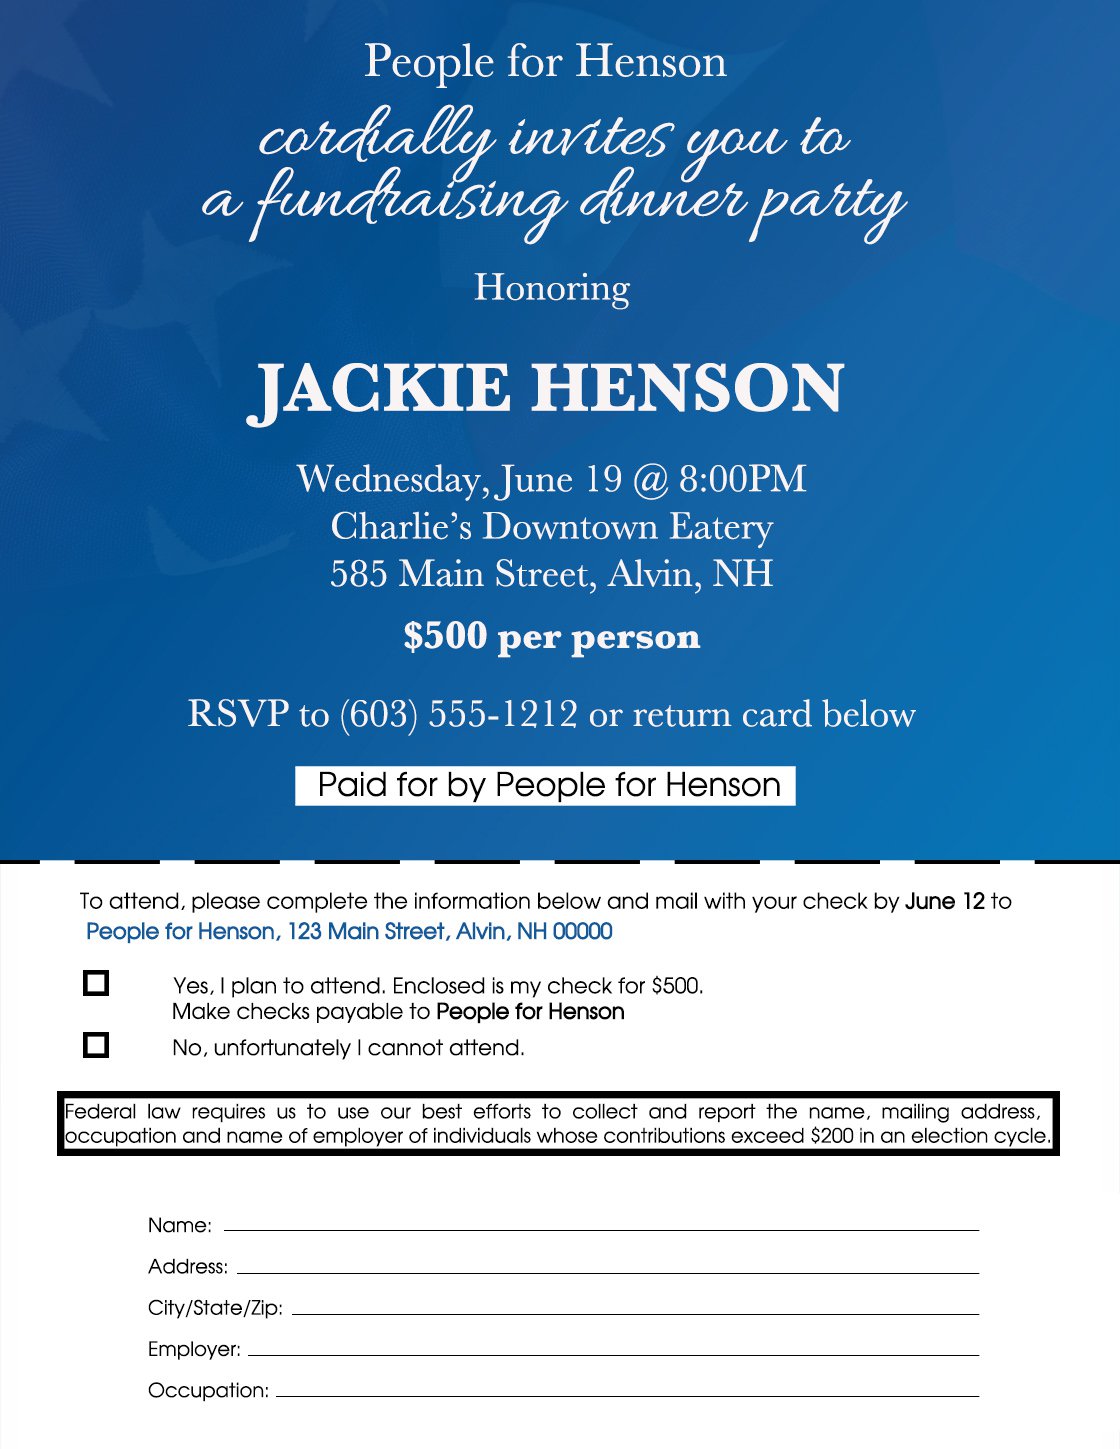 Candidate Committee Fundraiser Invitation Example